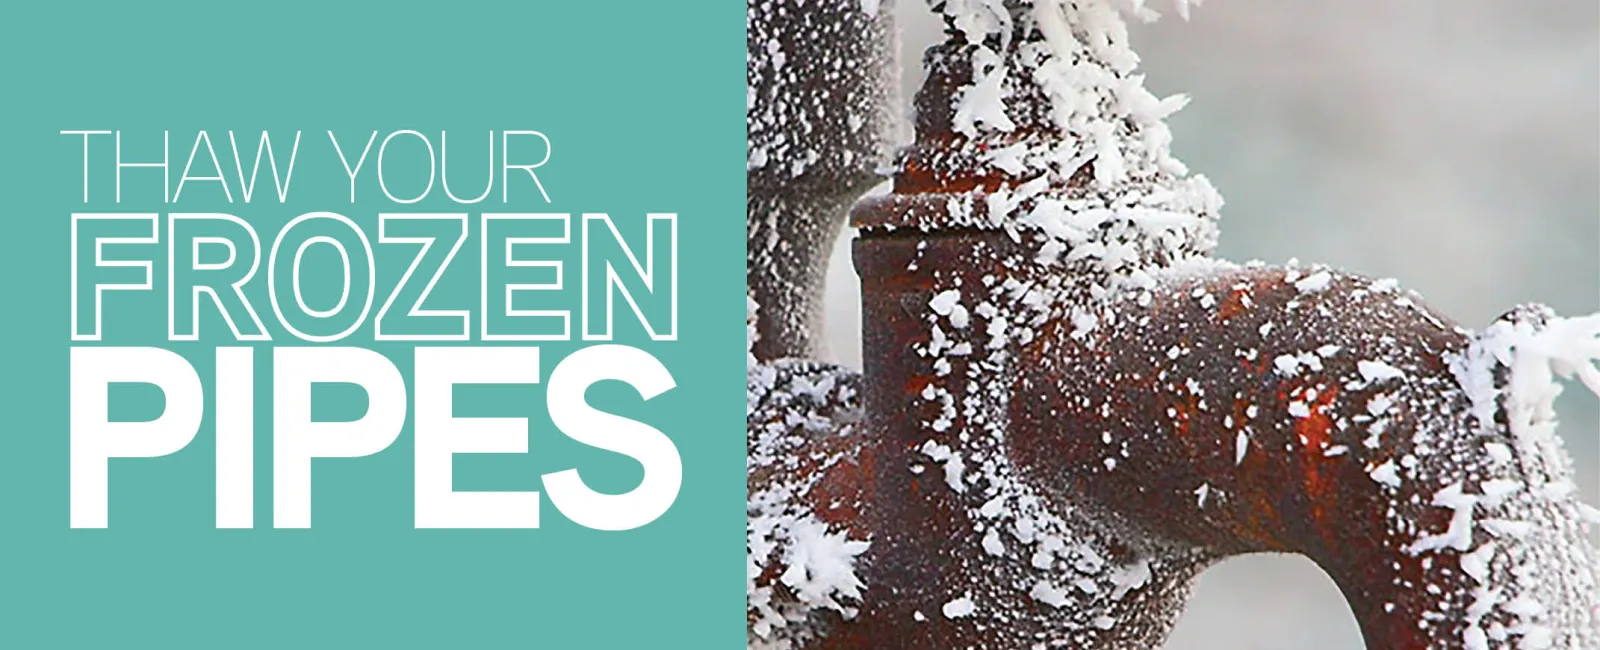 Thaw Your Frozen Pipes